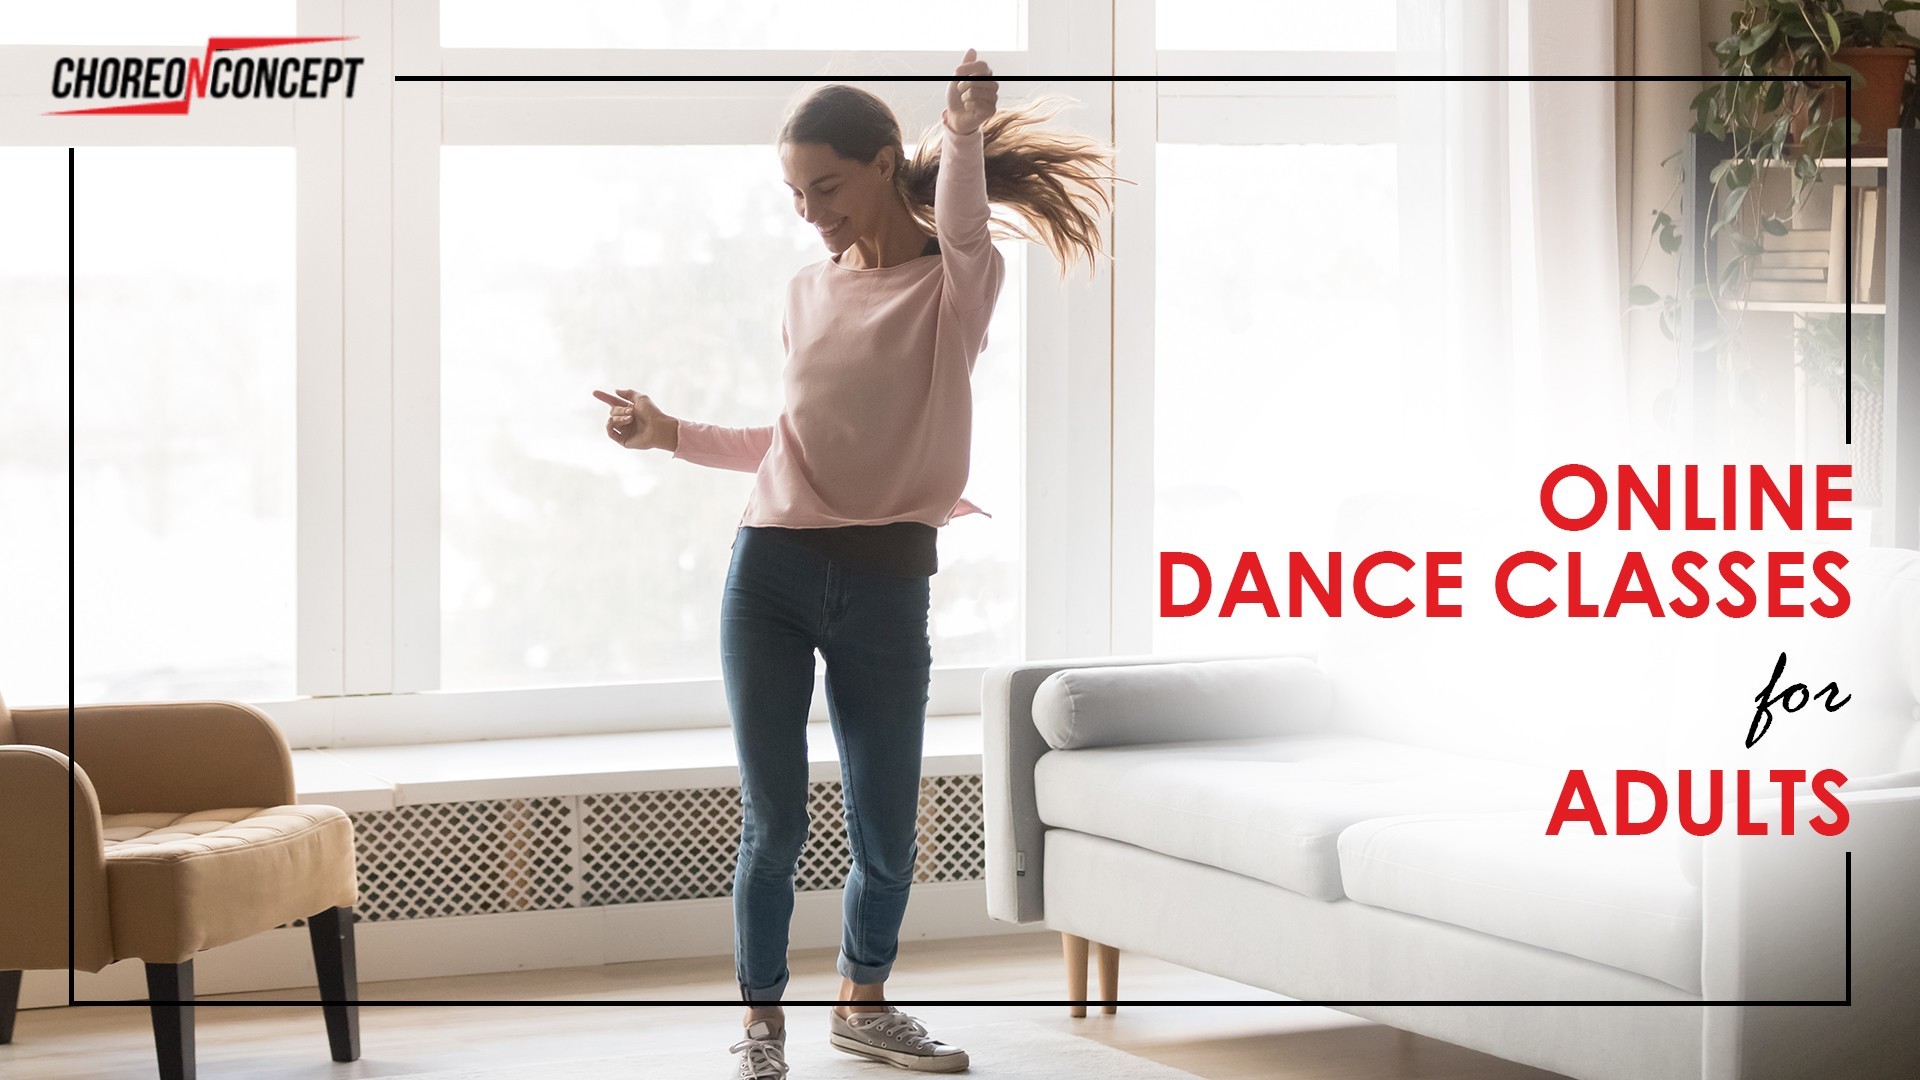 Online Dance Classes For Adults